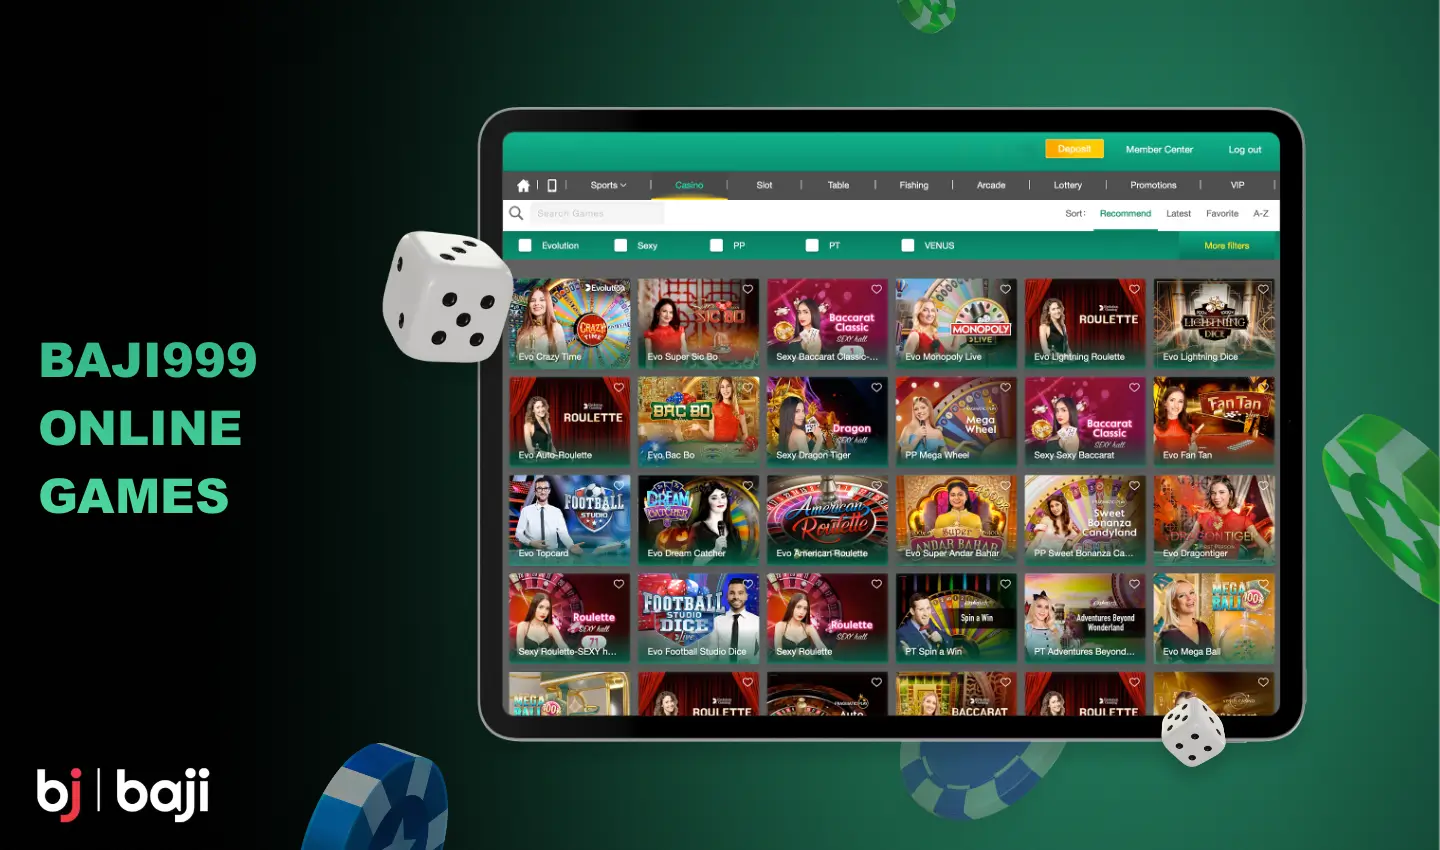 Baji999 has thousands of exciting casino games to choose from